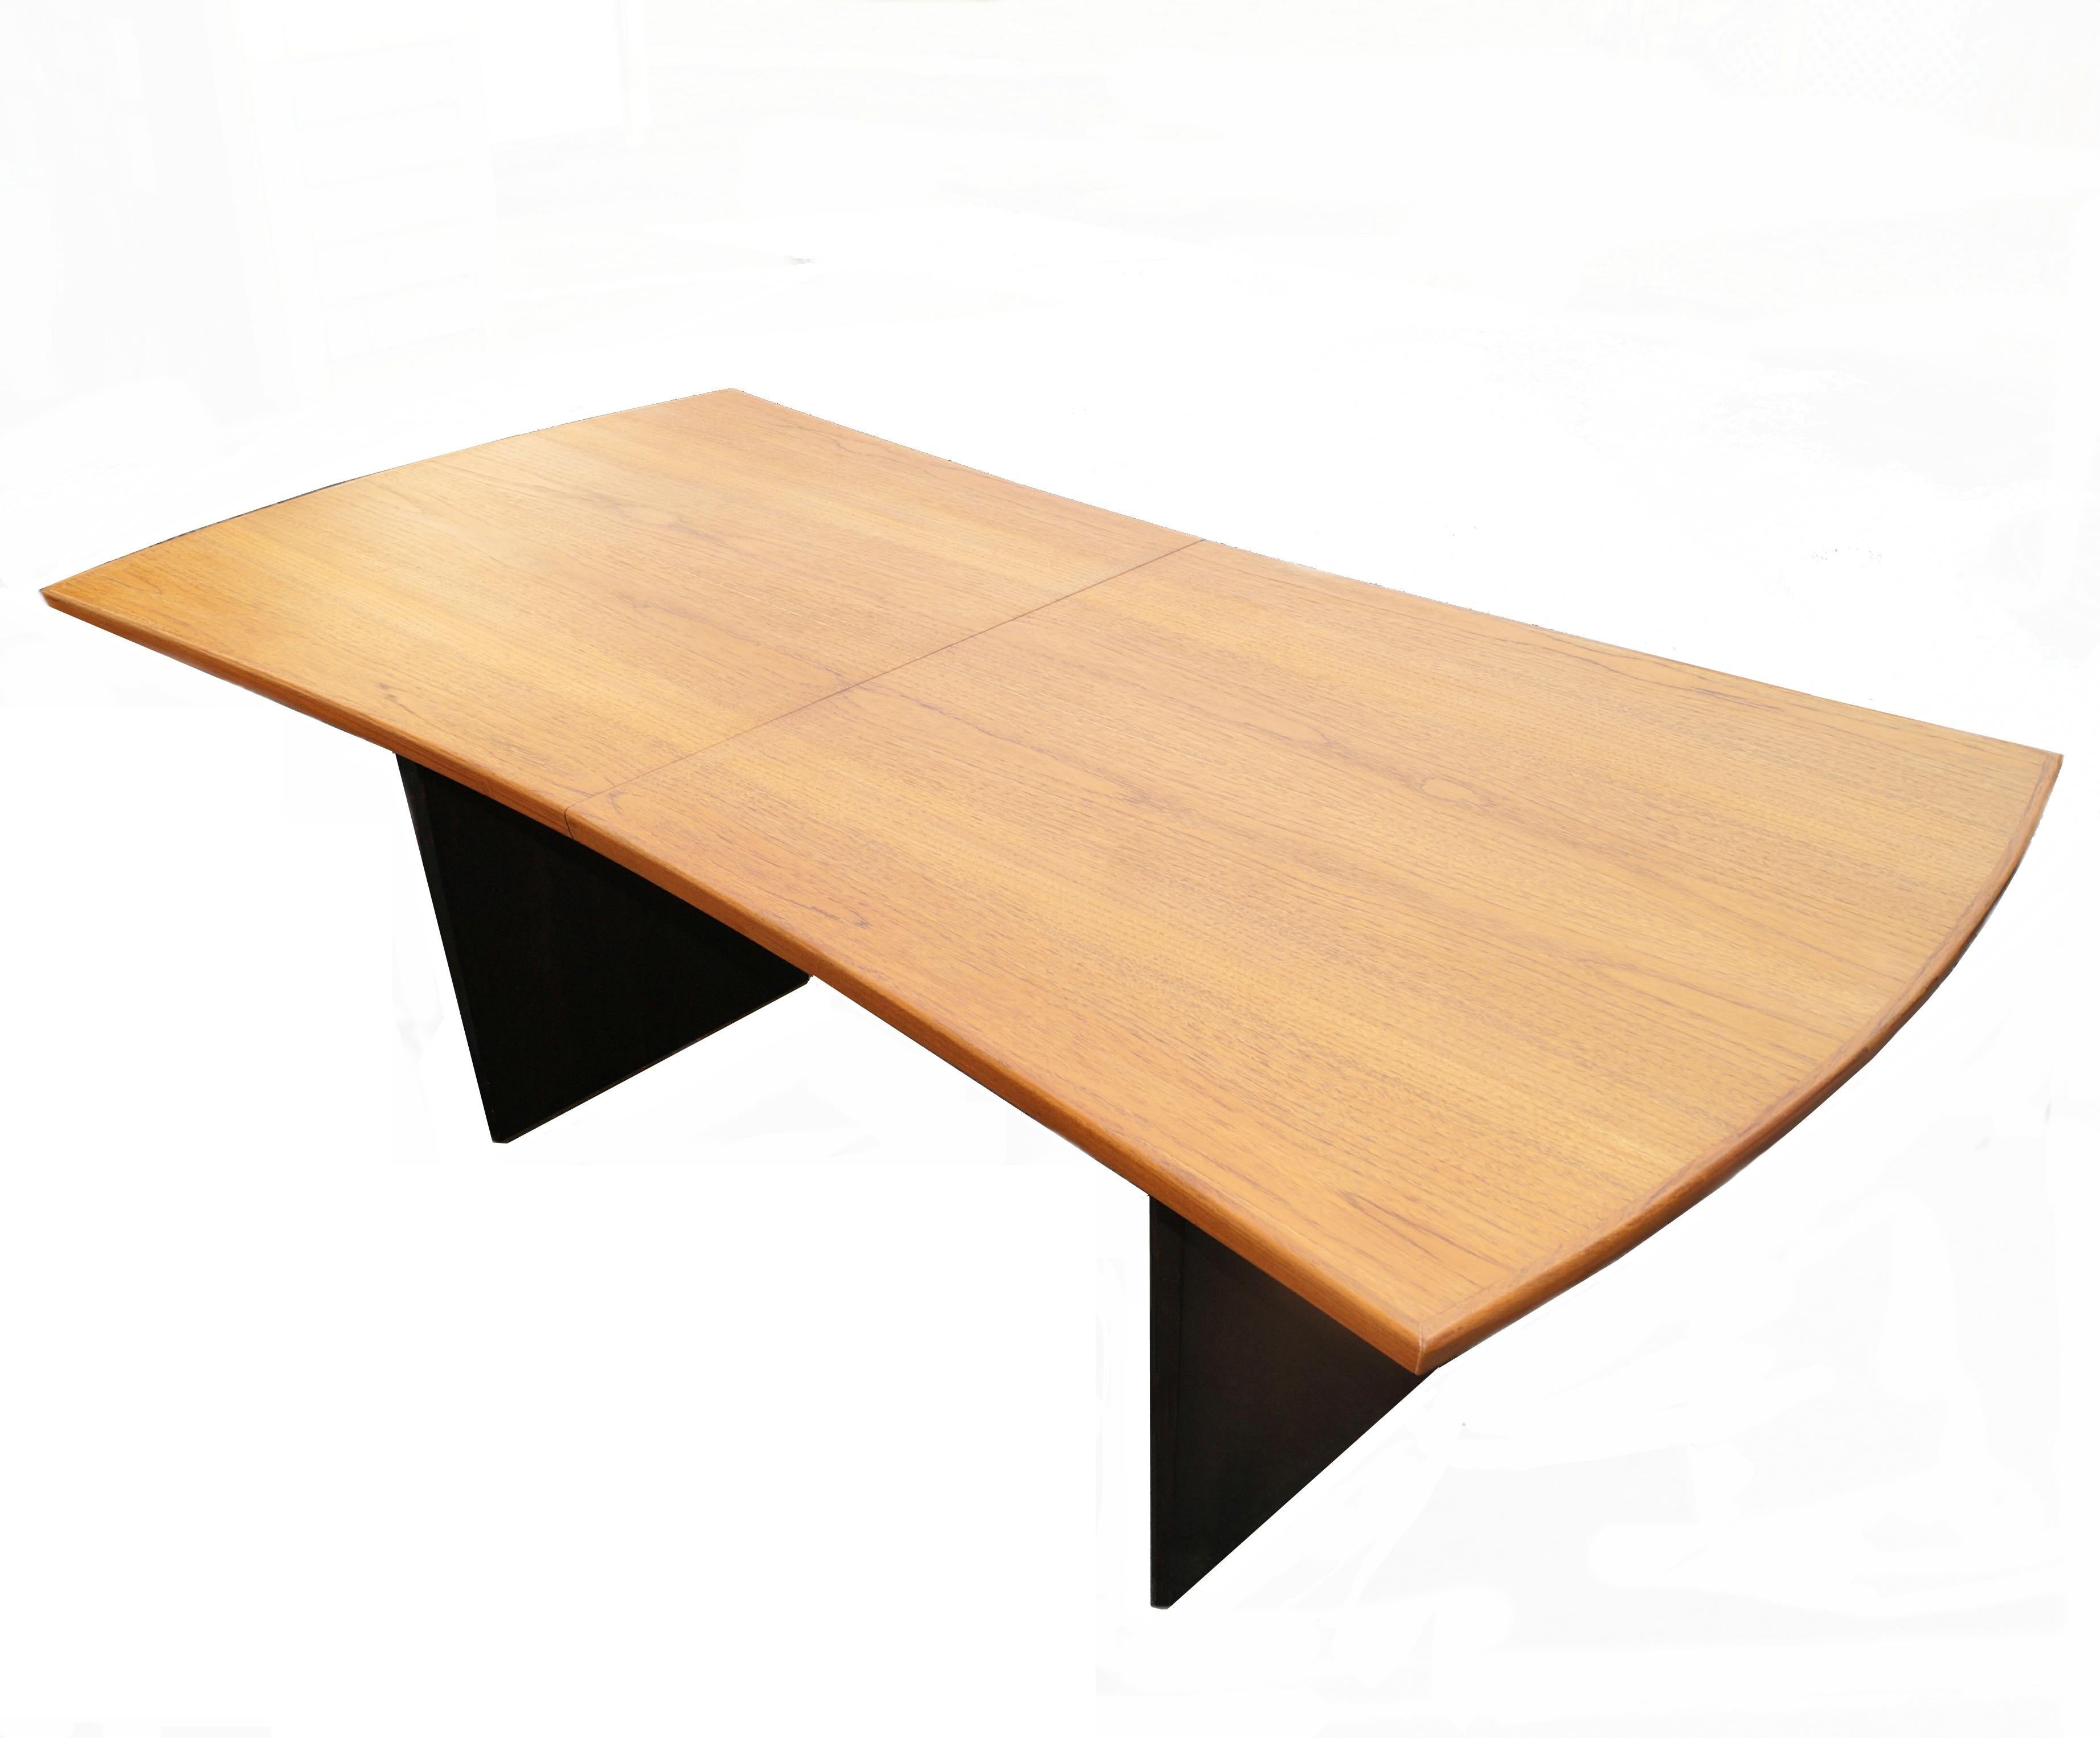 Harvey Probber bow tie dining table with 2 leaves. It is 35.75